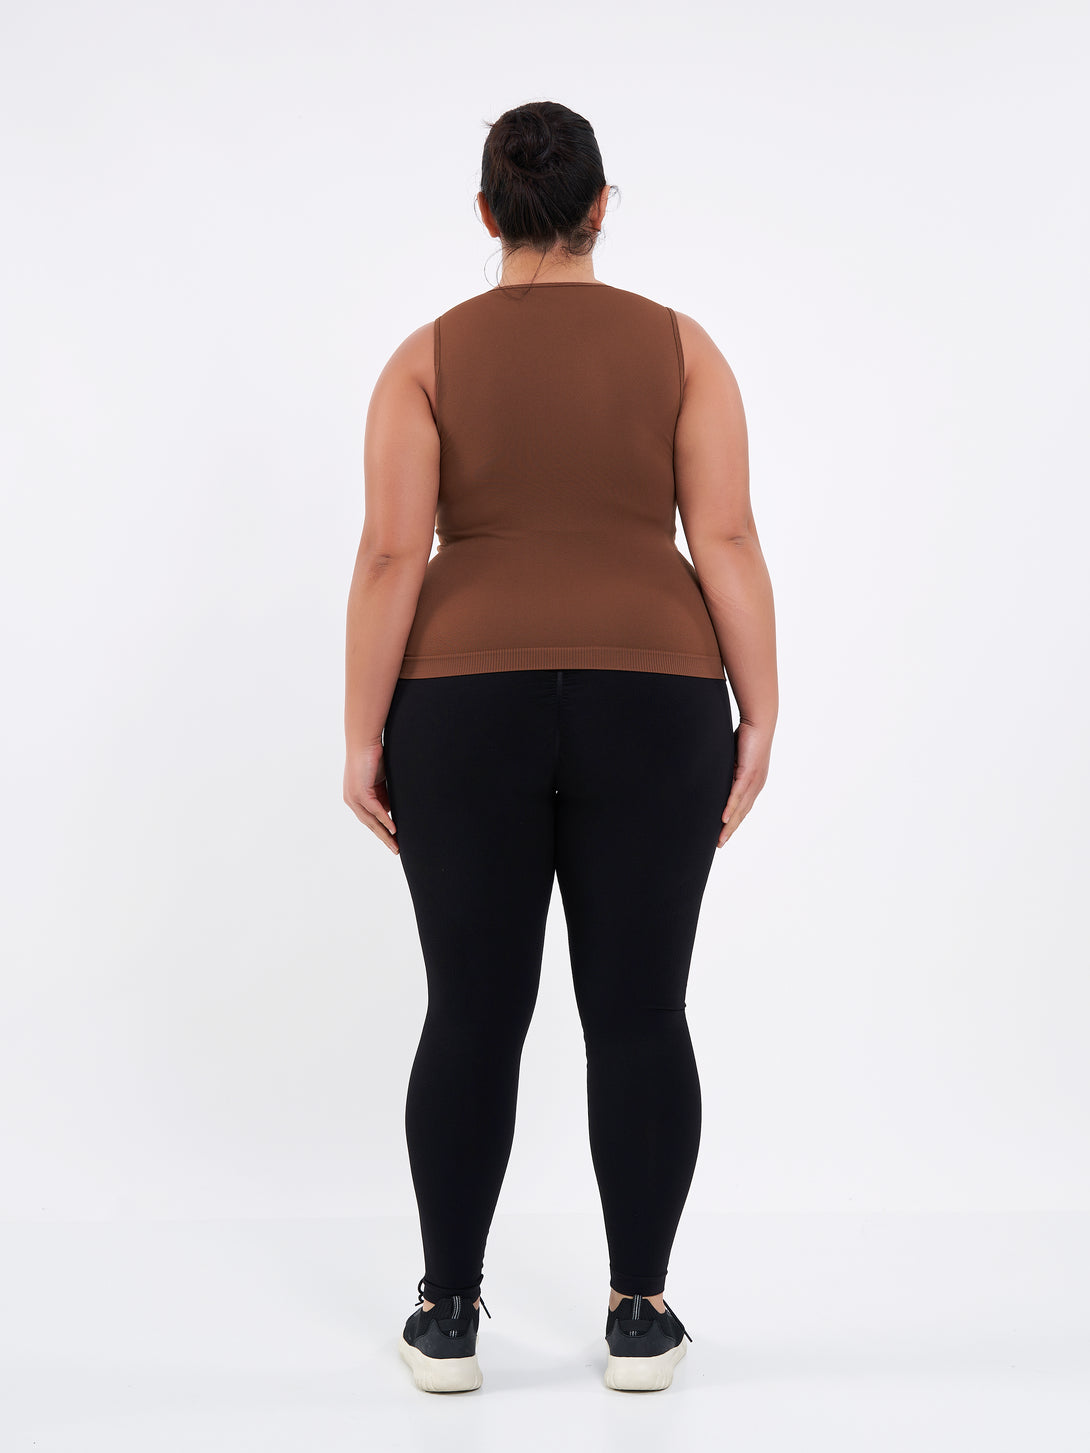 A Women Wearing Toffe Brown Color Zen Confidence Seamless Compressive Crop Top. Sculpted Silhouette